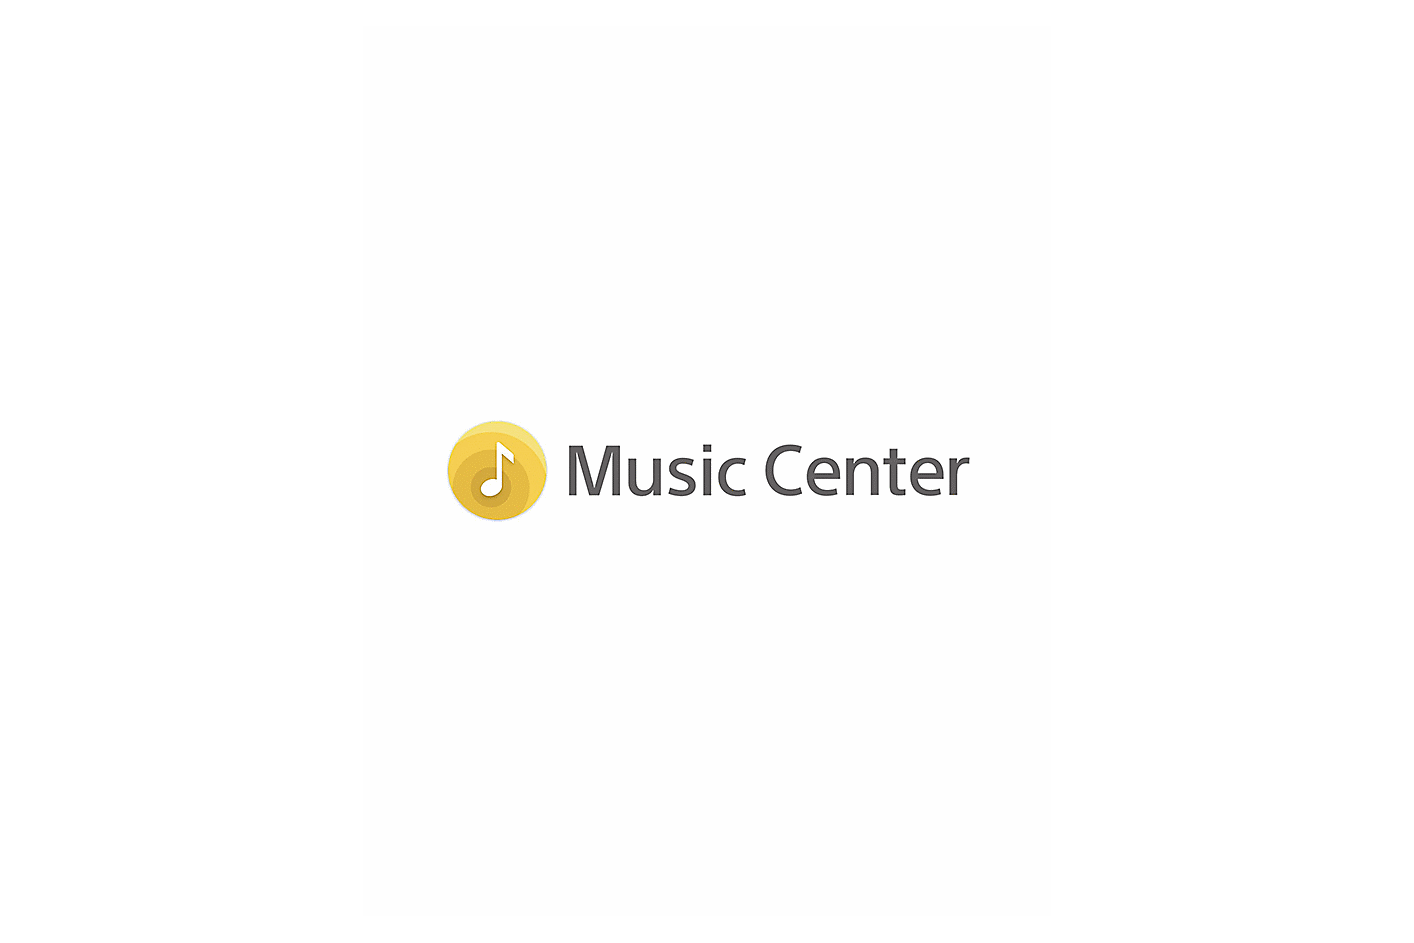 Image of the Sony Music Center logo